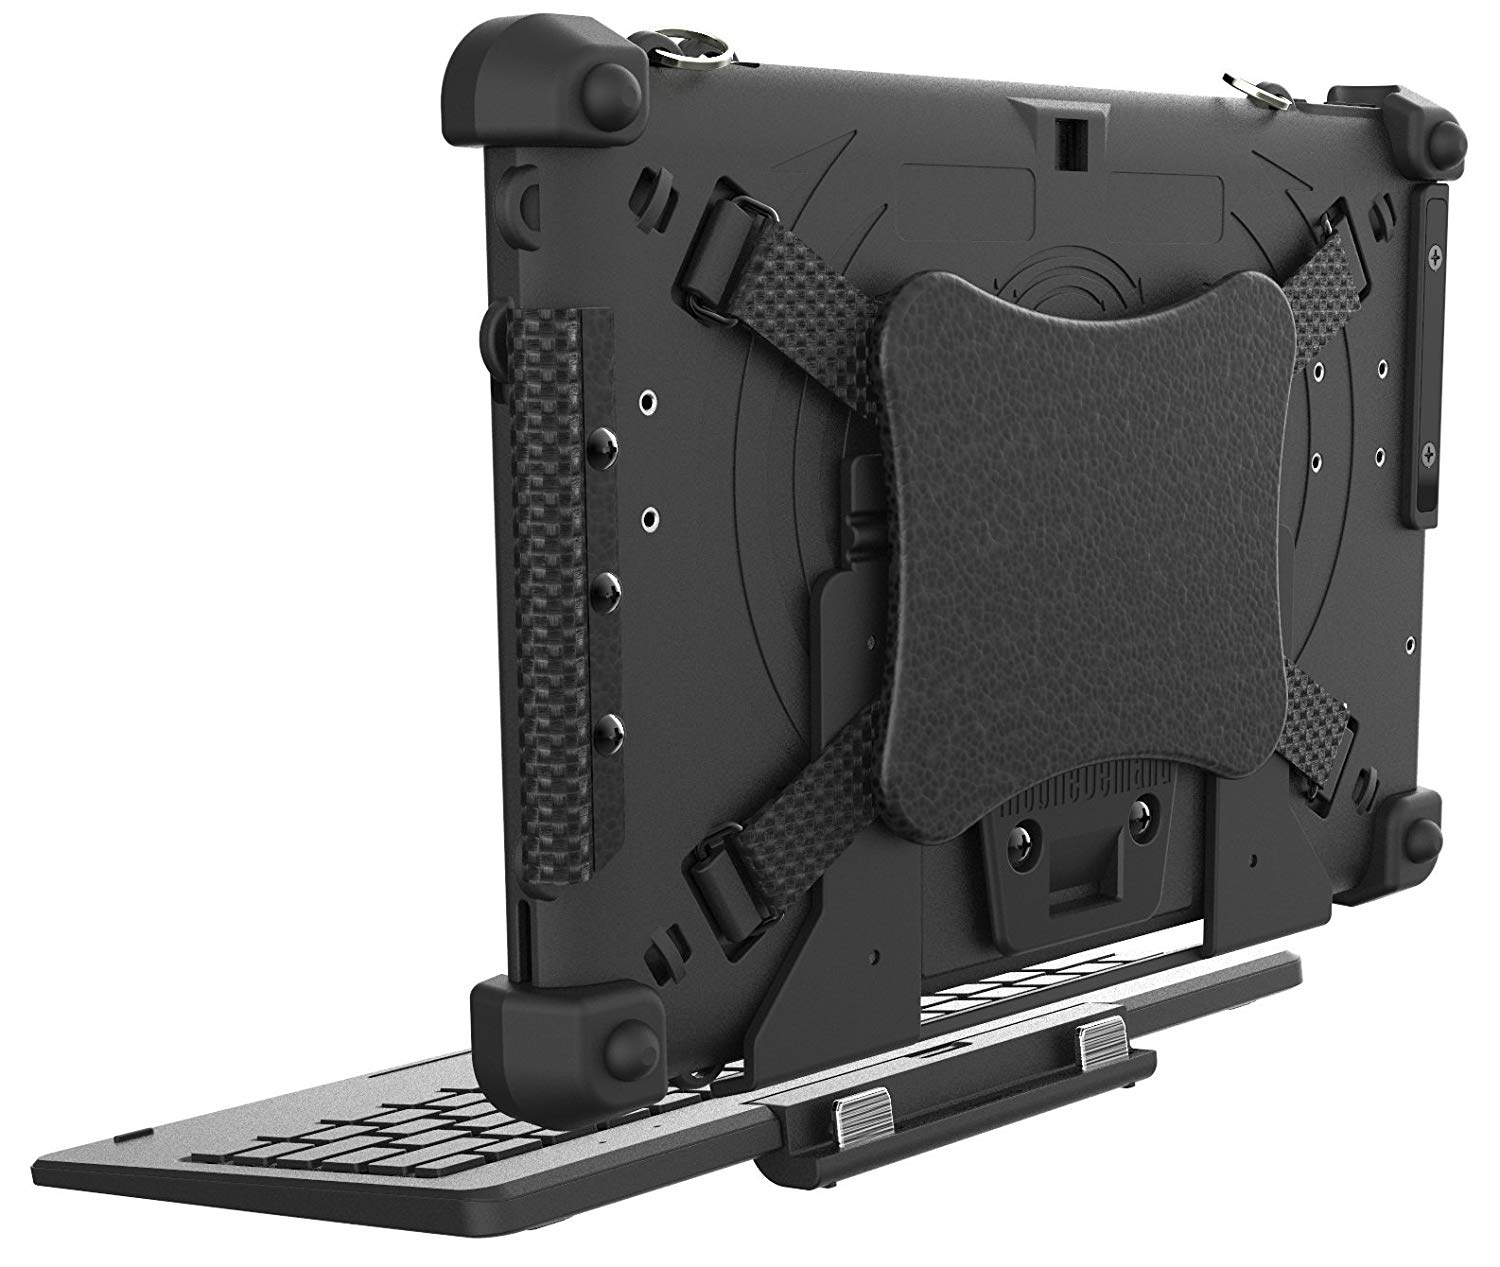 MobileDemand Flex 10A Windows 10 Pro Rugged 2-in-1 Tablet / Laptop with Keyboard - Military Drop Tested